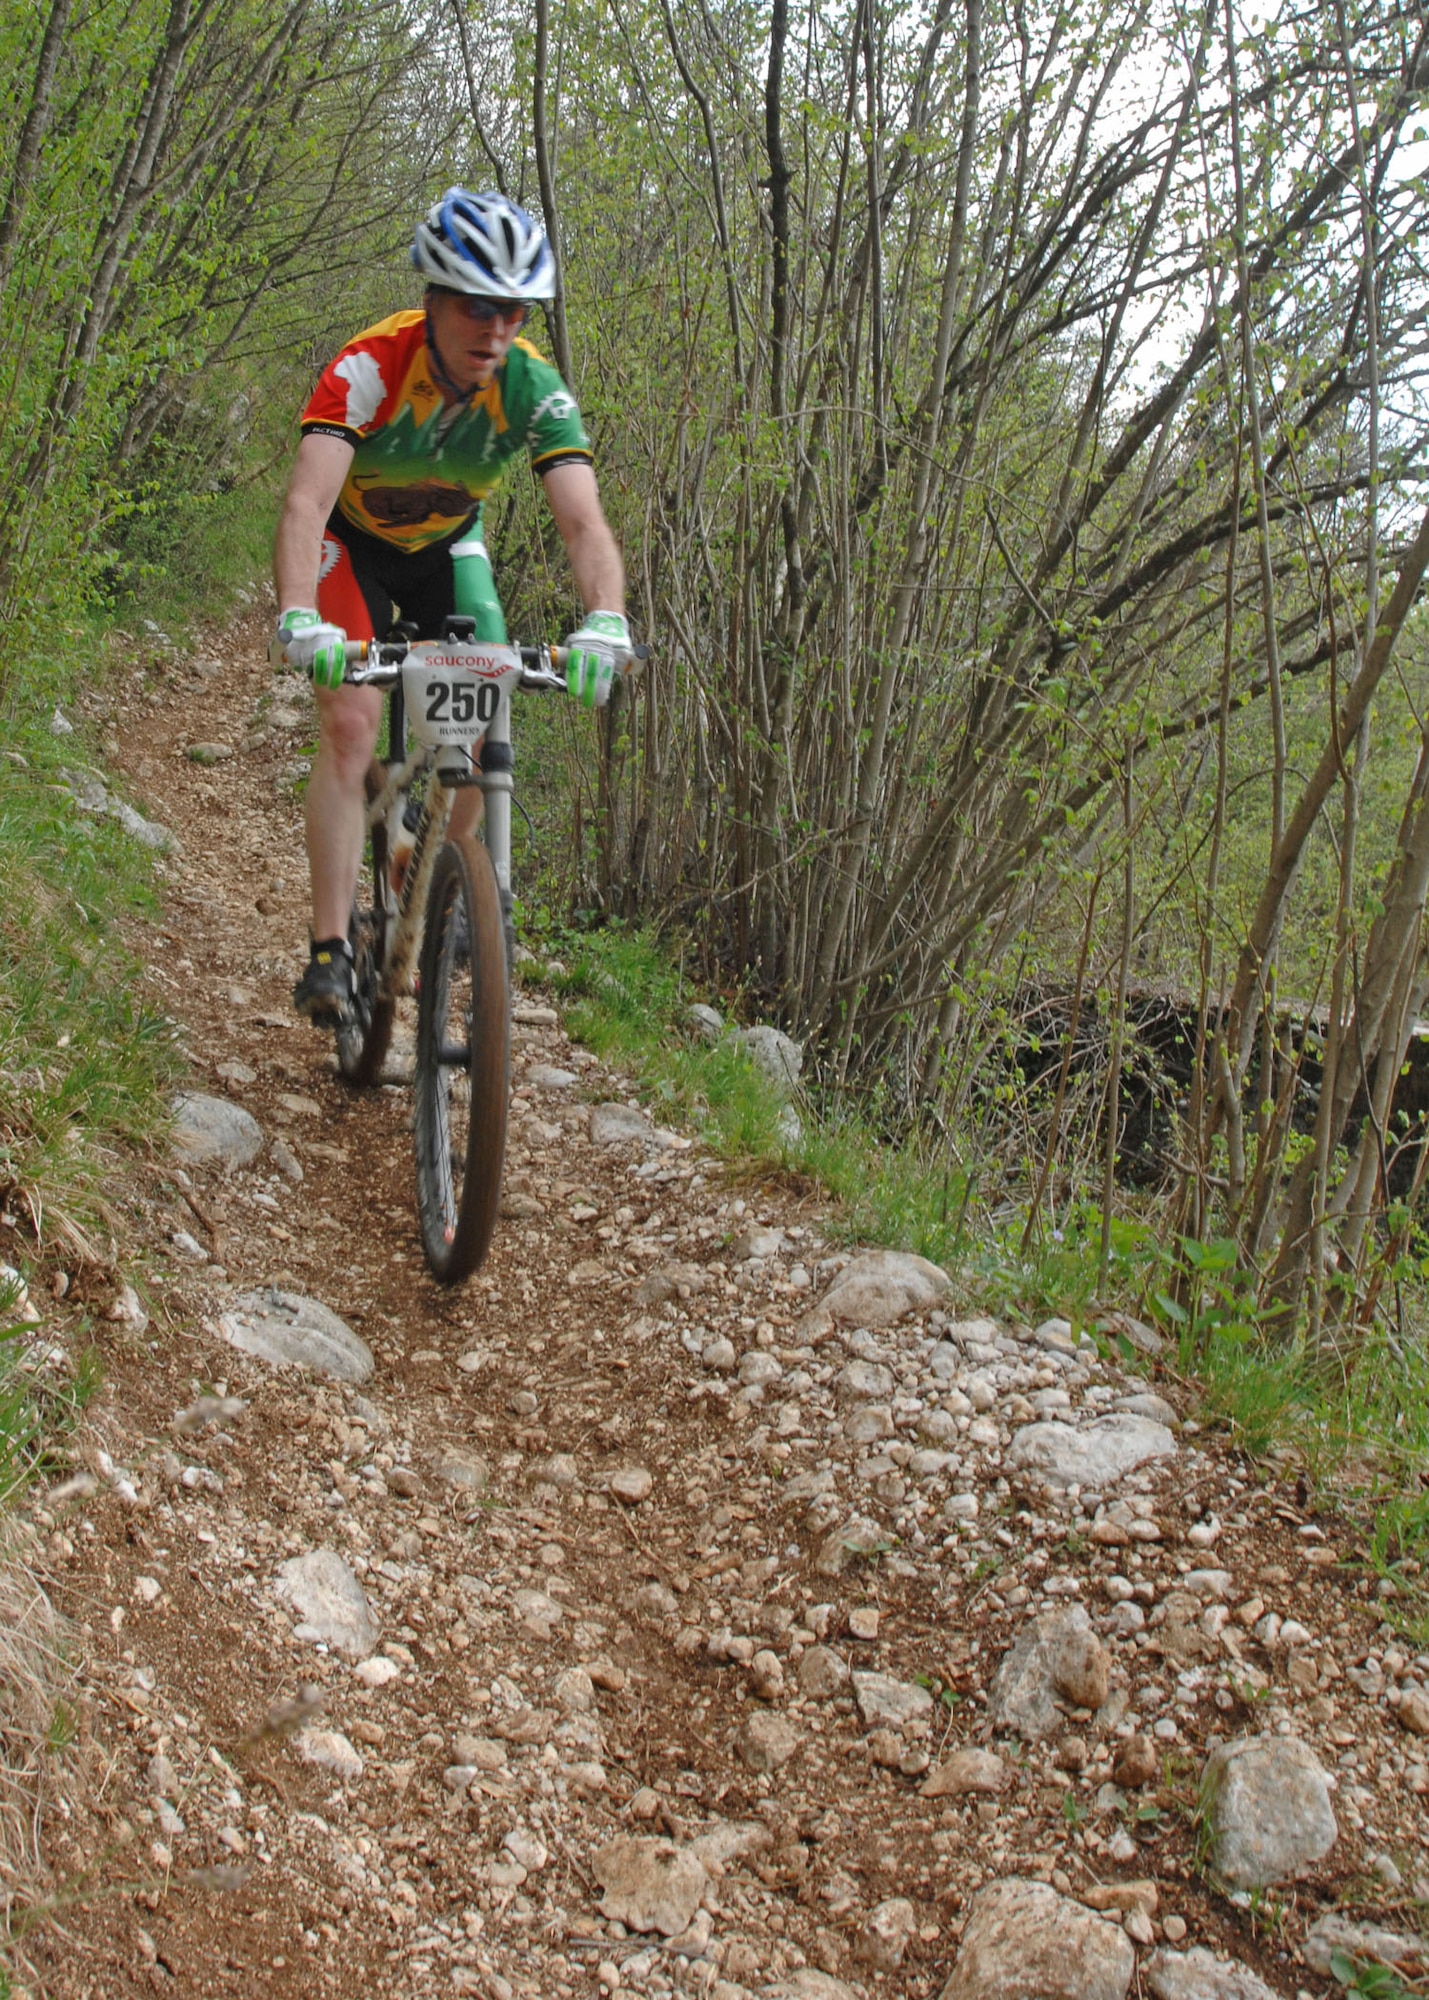 Andrew Overfield from U.S. Army Garrison in Stuttgart, Germany, navigates through one of several tricky downhill portions of the 6.25 kilometer loop at Camp Delta located at the base of the Dolomite Mountains near Aviano, Italy on April 18. Overfield won the 25 kilometer race with a time of 1:19.15.  Eighteen riders from Germany and Italy took part in the 2009 U.S. Forces Europe Mountain Bike Series race.  (U.S. Air Force photo/Tech. Sgt. Michael O'Connor)